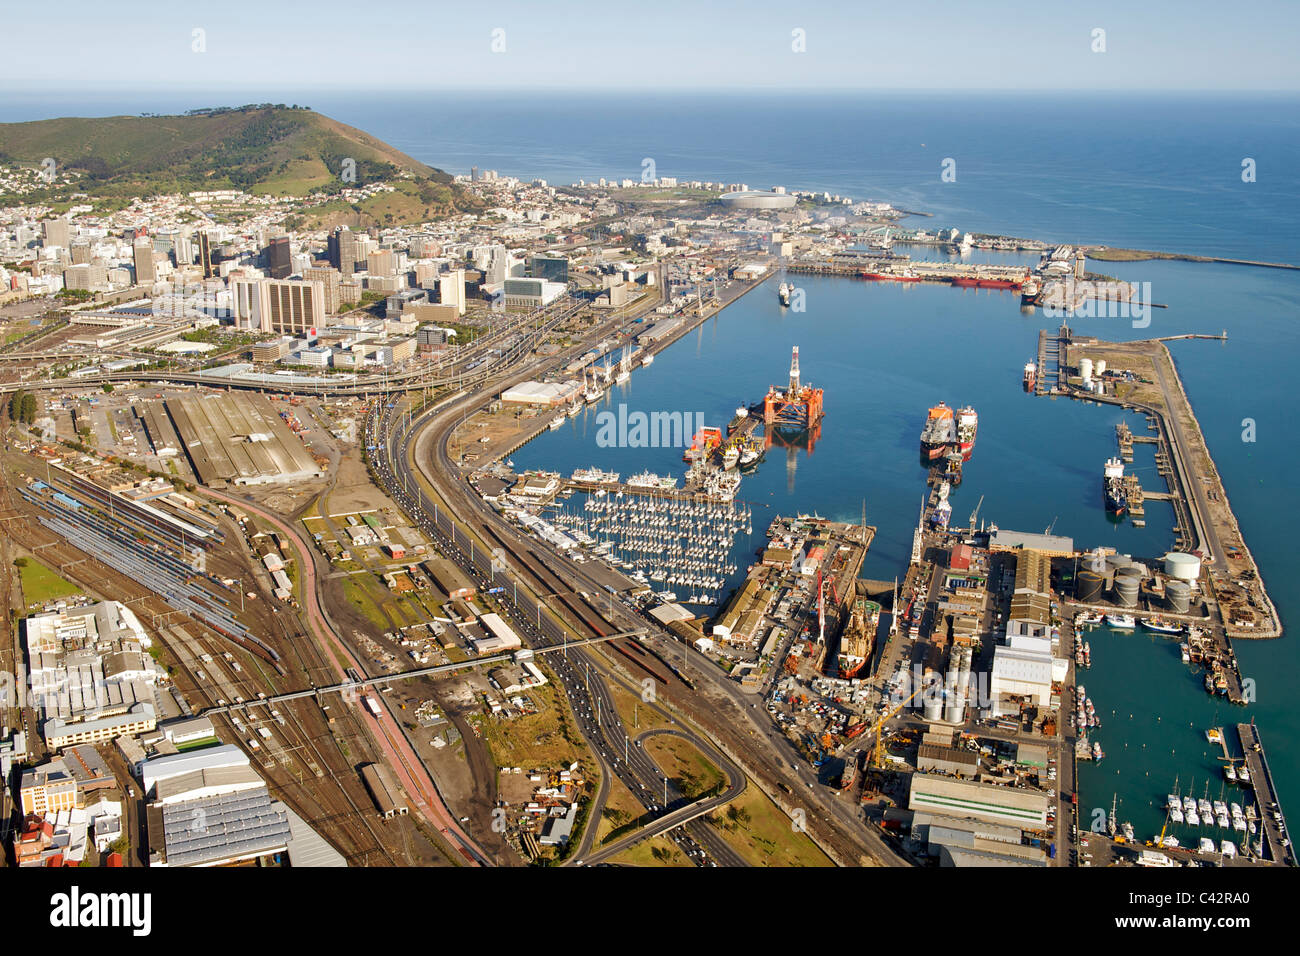 Aerial view of Table Bay harbour and parts of the CBD in Cape Town, South Africa. Stock Photo